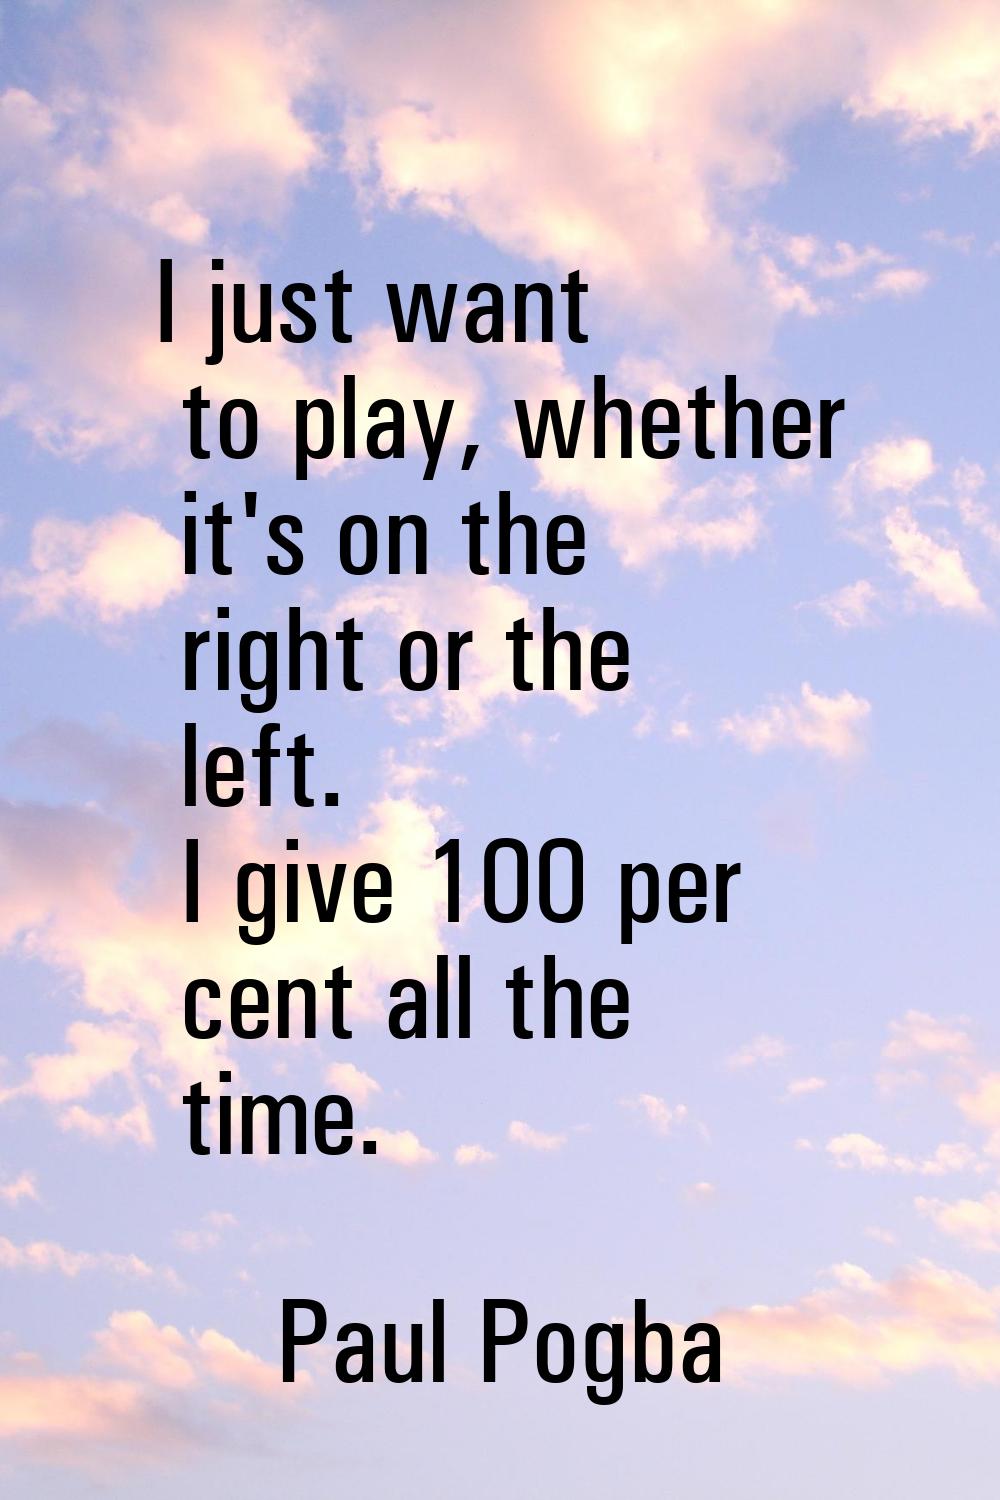 I just want to play, whether it's on the right or the left. I give 100 per cent all the time.